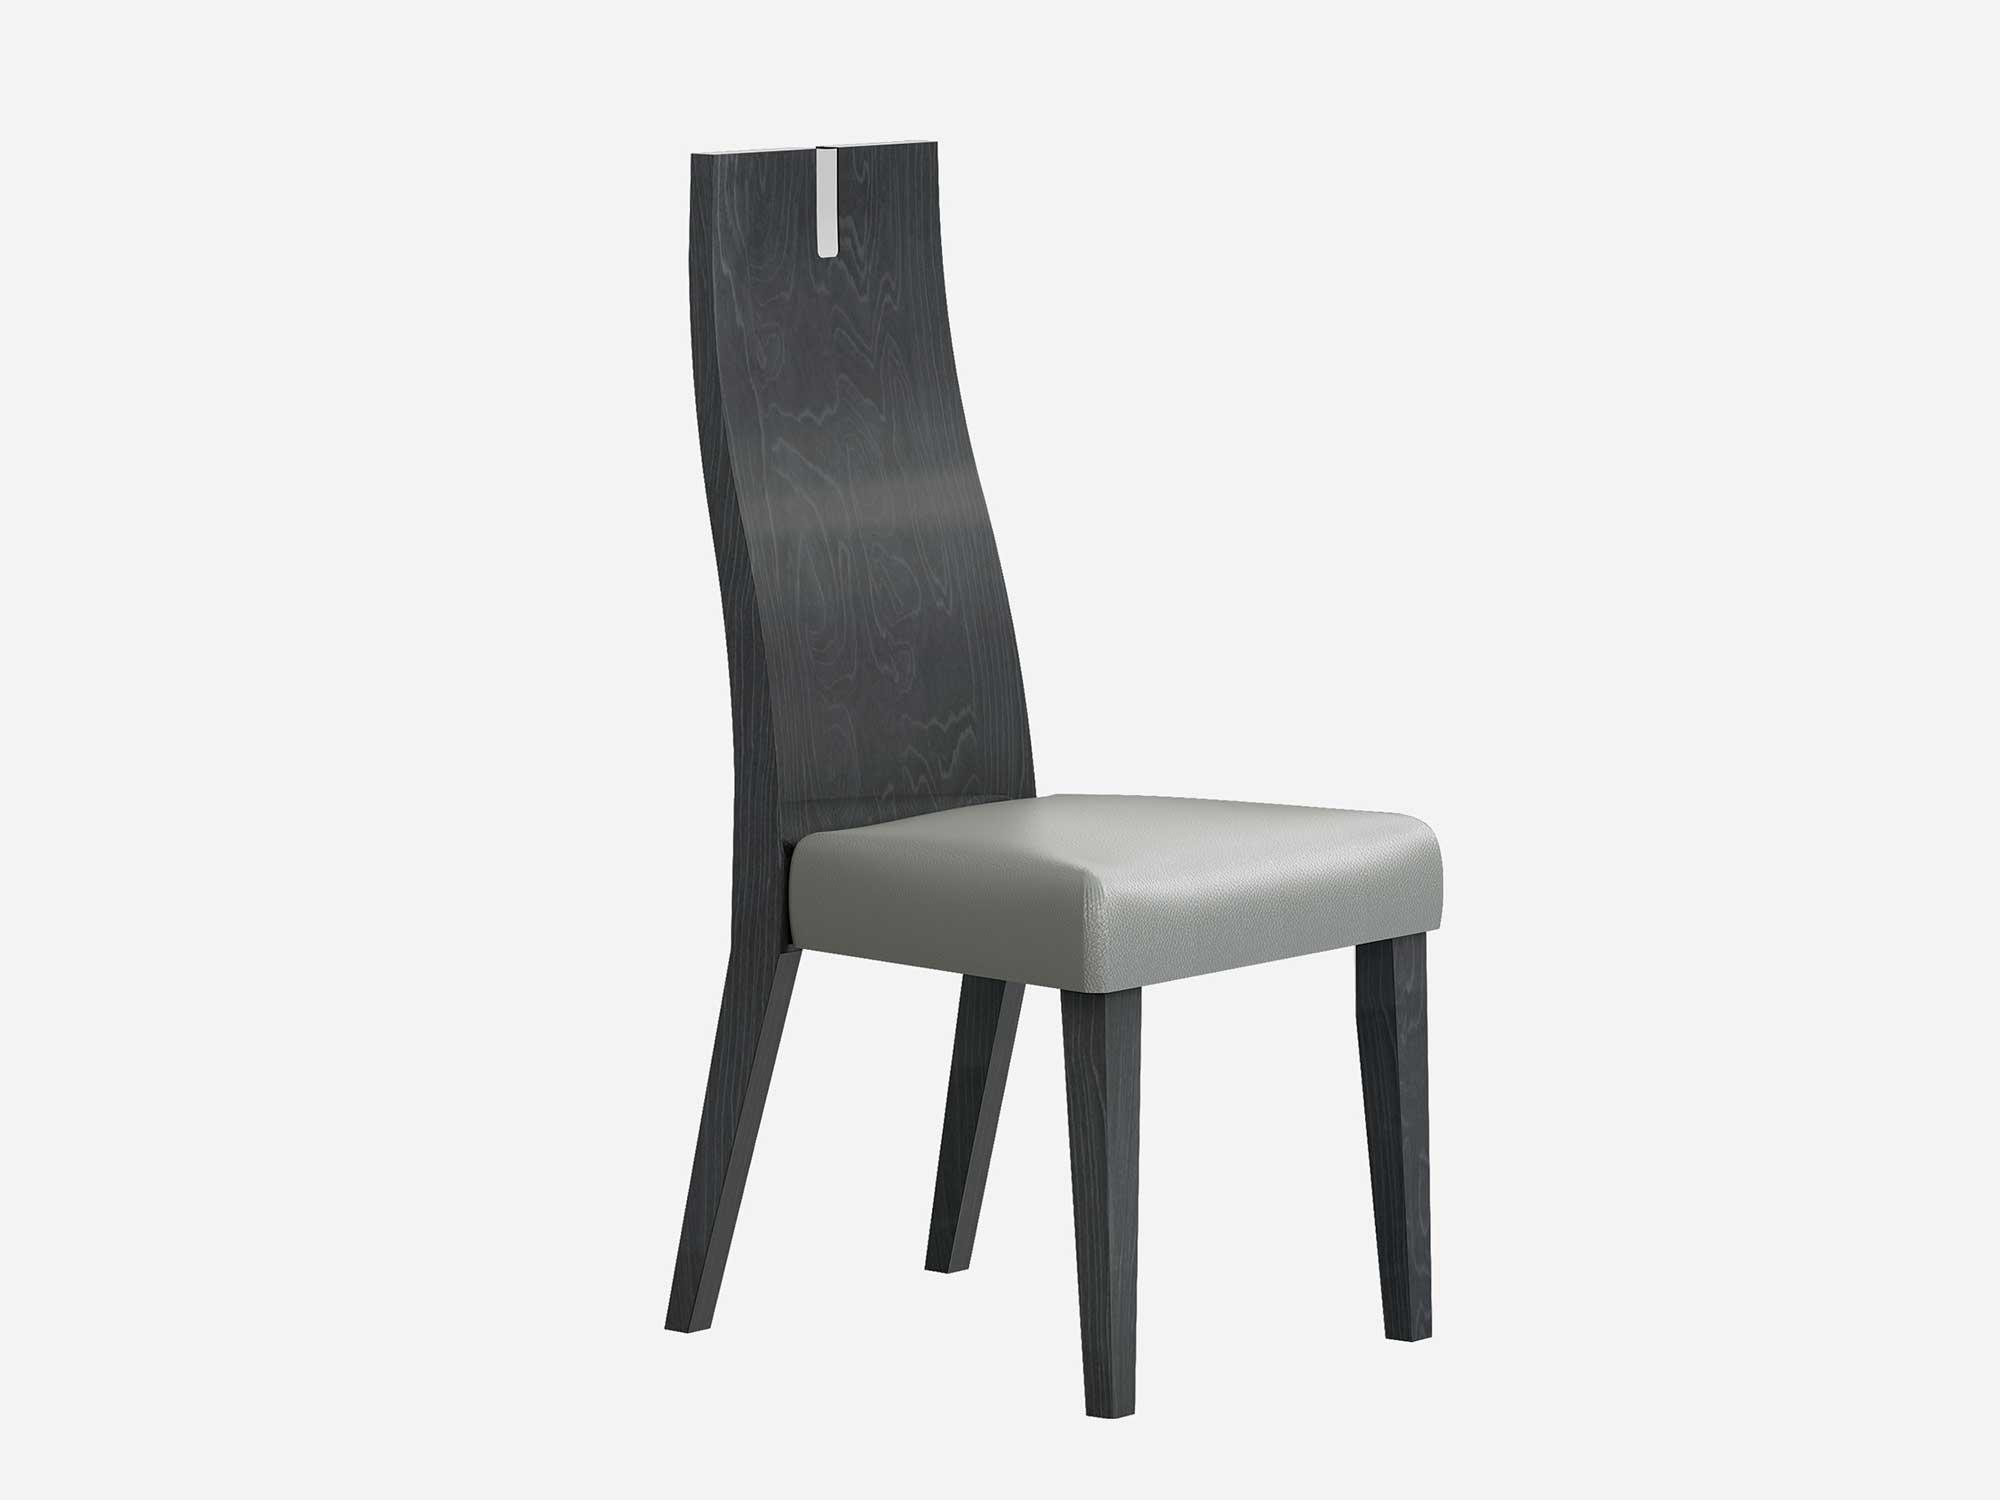 Modern Dining Chair Set DC1619-GRY Los Angeles DC1619-GRY in Gray Faux Leather